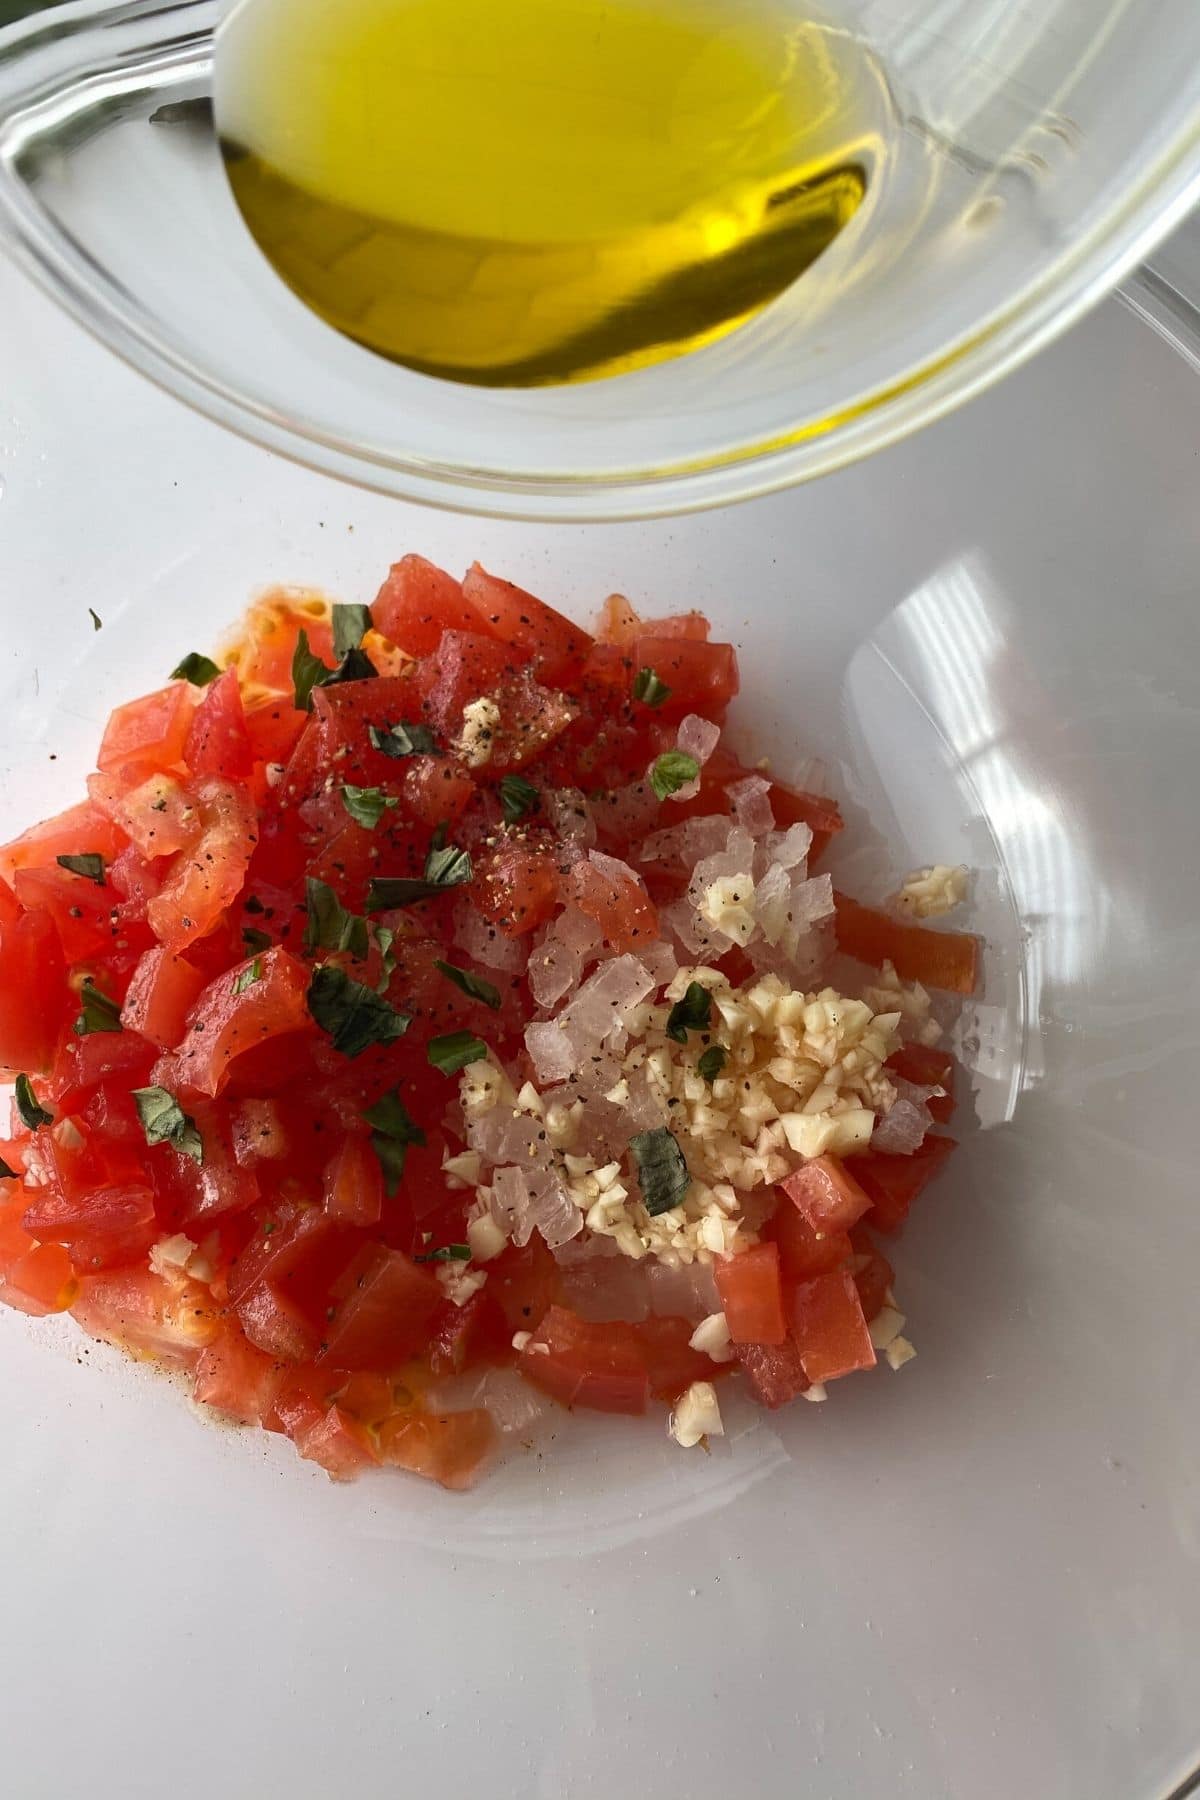 Tomato and garlic in bowl with cup of olive oil being poured over the top